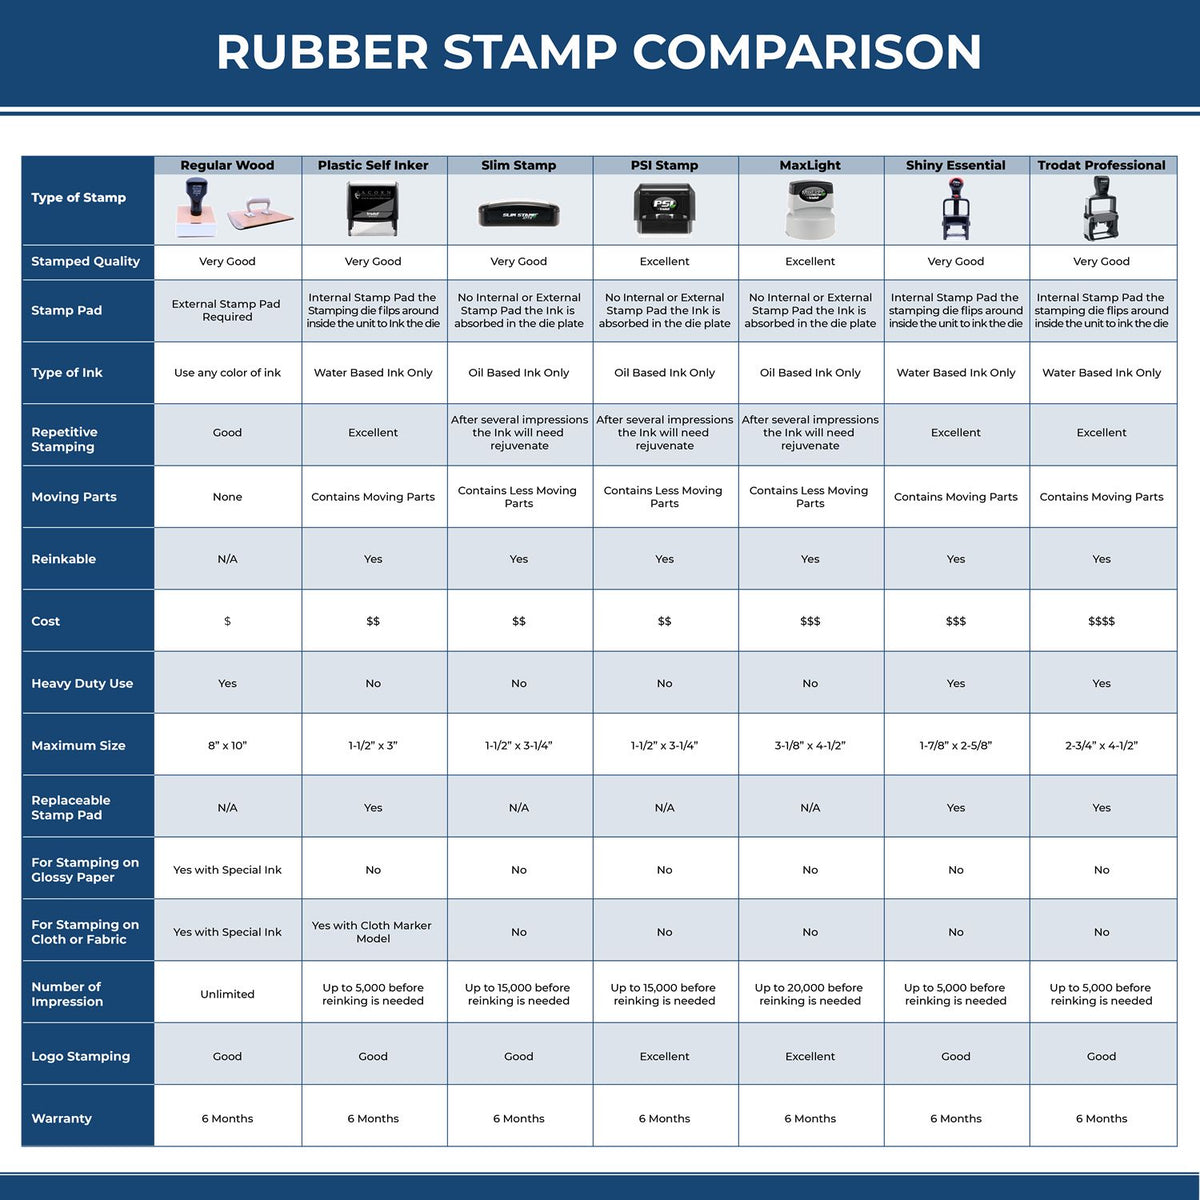 Self-Inking Cleaned and Sanitized Stamp 4491S Rubber Stamp Comparison